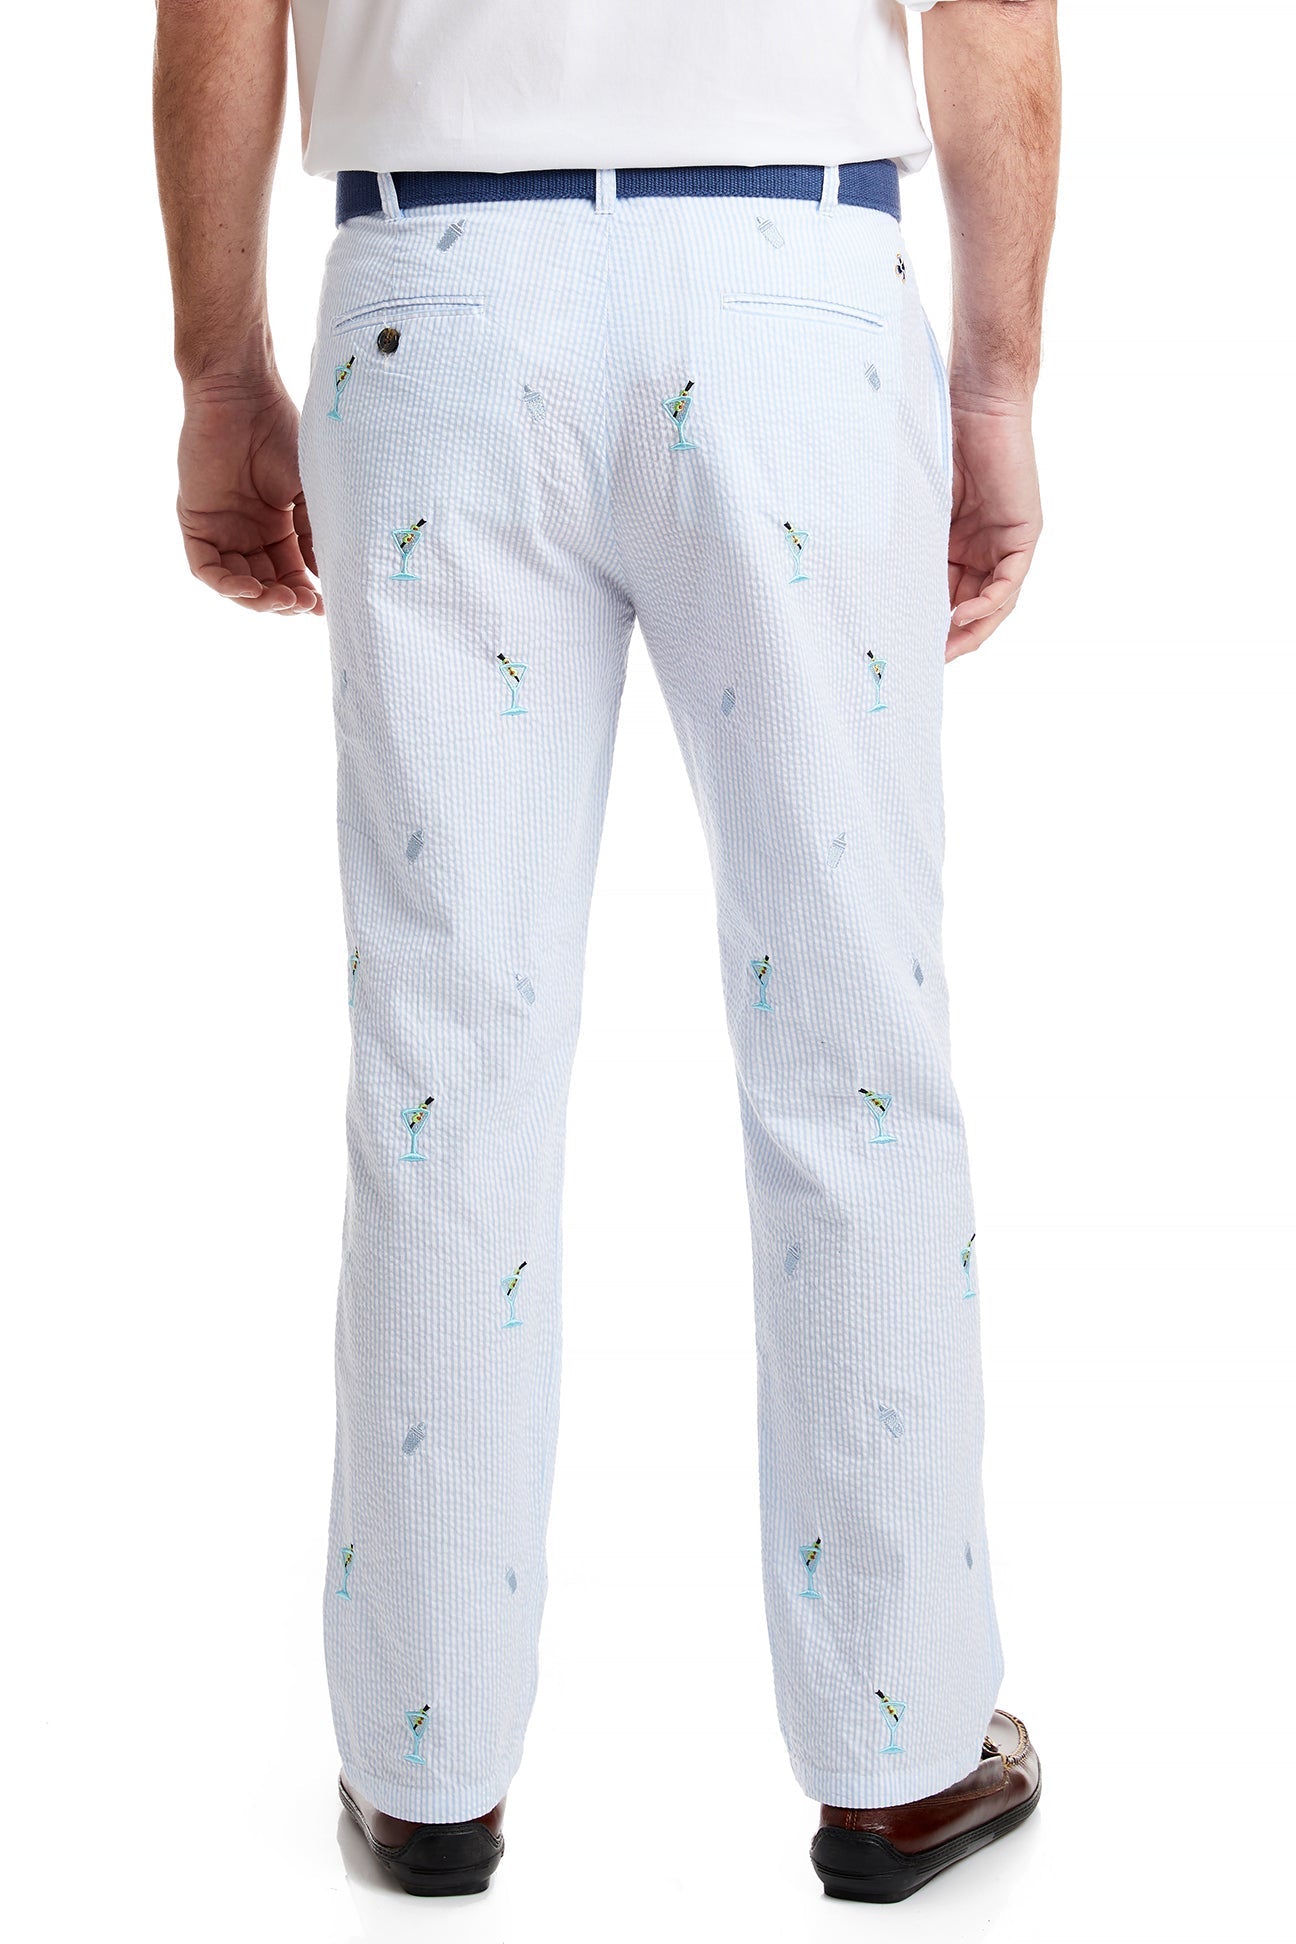 Harbor Pant Blue Seersucker with Martini and Shaker MENS EMBROIDERED PANTS Castaway Nantucket Island